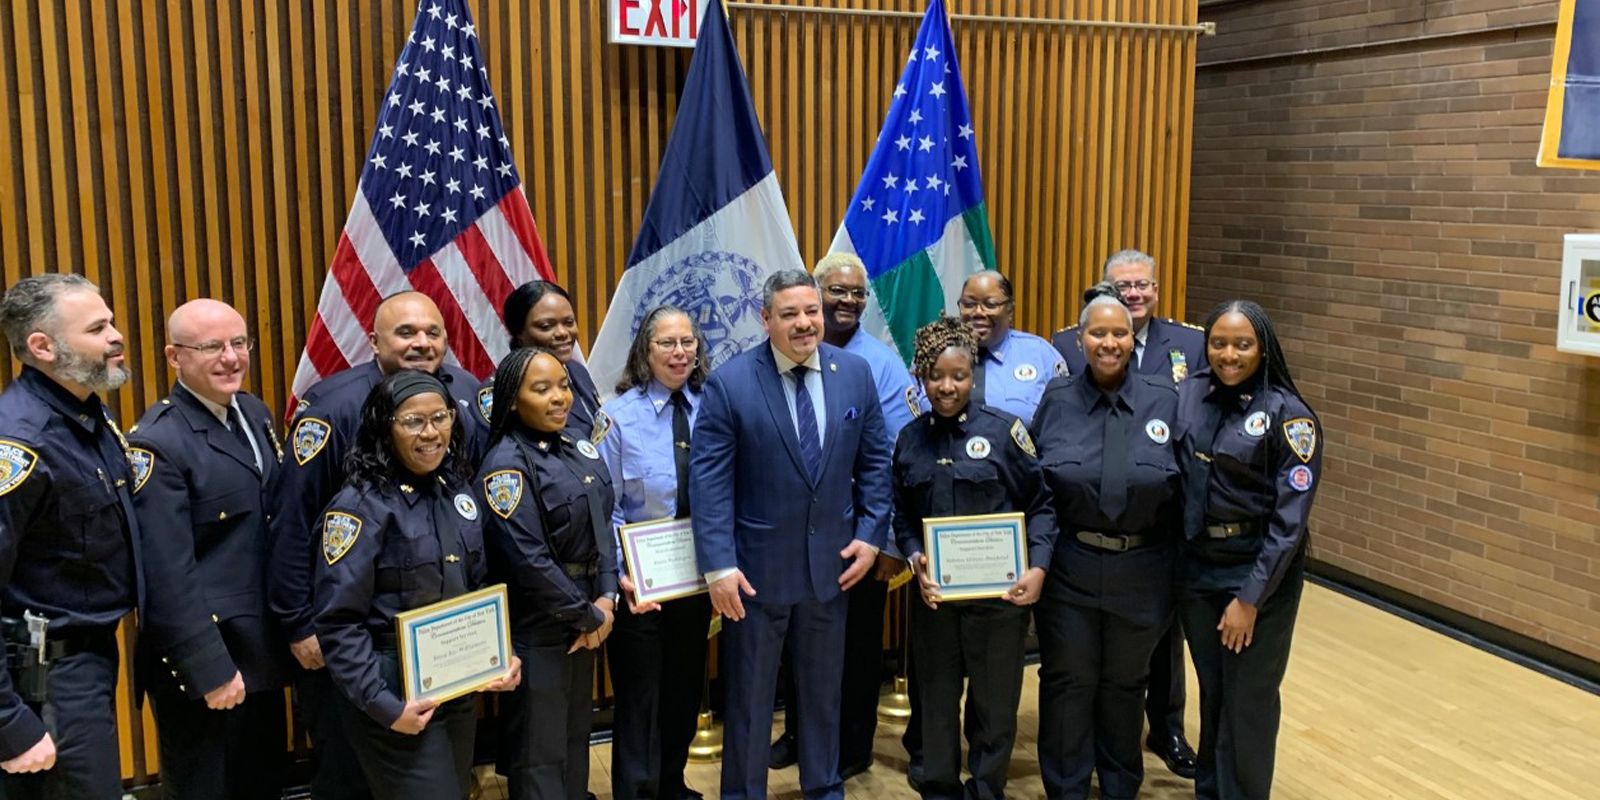 NYC dispatcher wins Never Quit Service Award after stopping shooter in subway